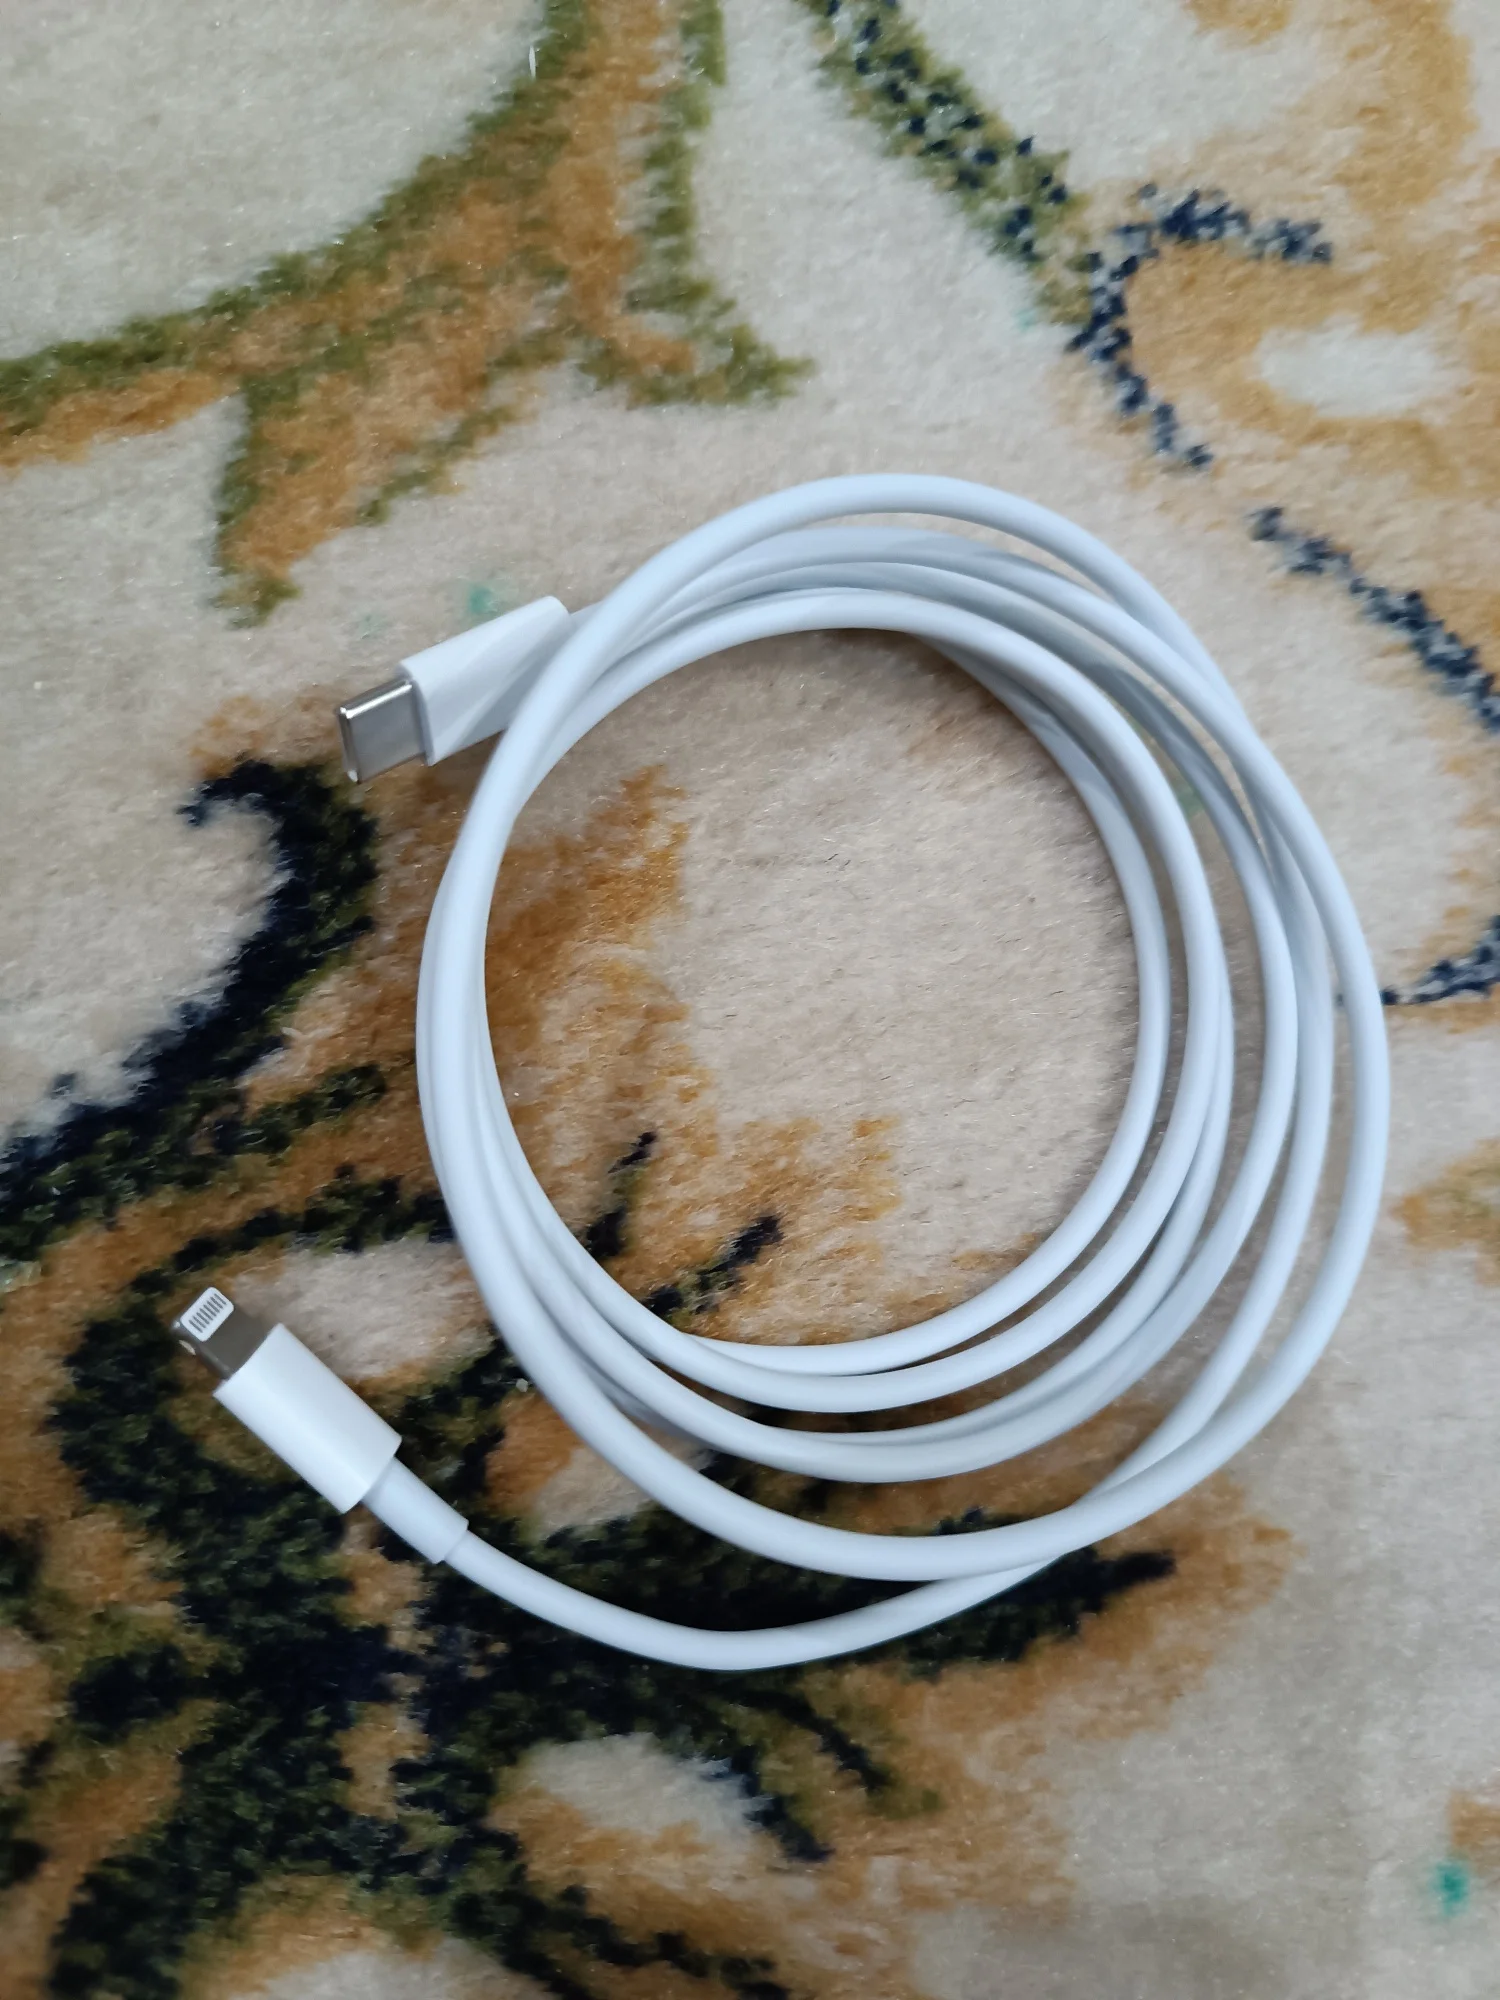 MOMAX magnetic data cable is easy to store and does not wrap around the braided cable pd100w. It is suitable for Huawei, Apple, MacBook, Android, usb-c interface, iPad, mobile phone and tablet fast charging data cable.